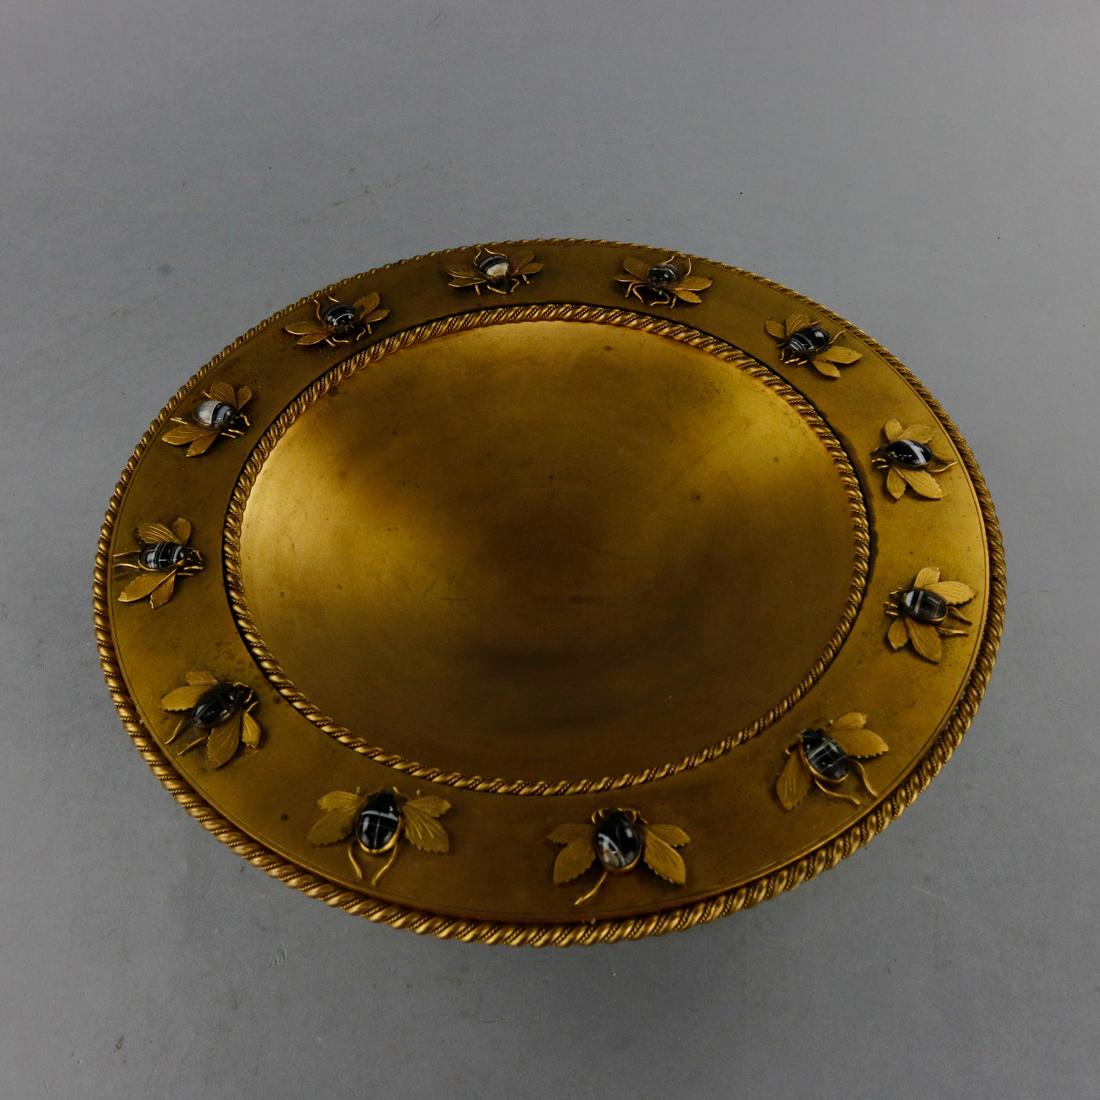 Carved Antique Egyptian Revival Gilt Bronze Tazza with Agate Scarabs, circa 1870